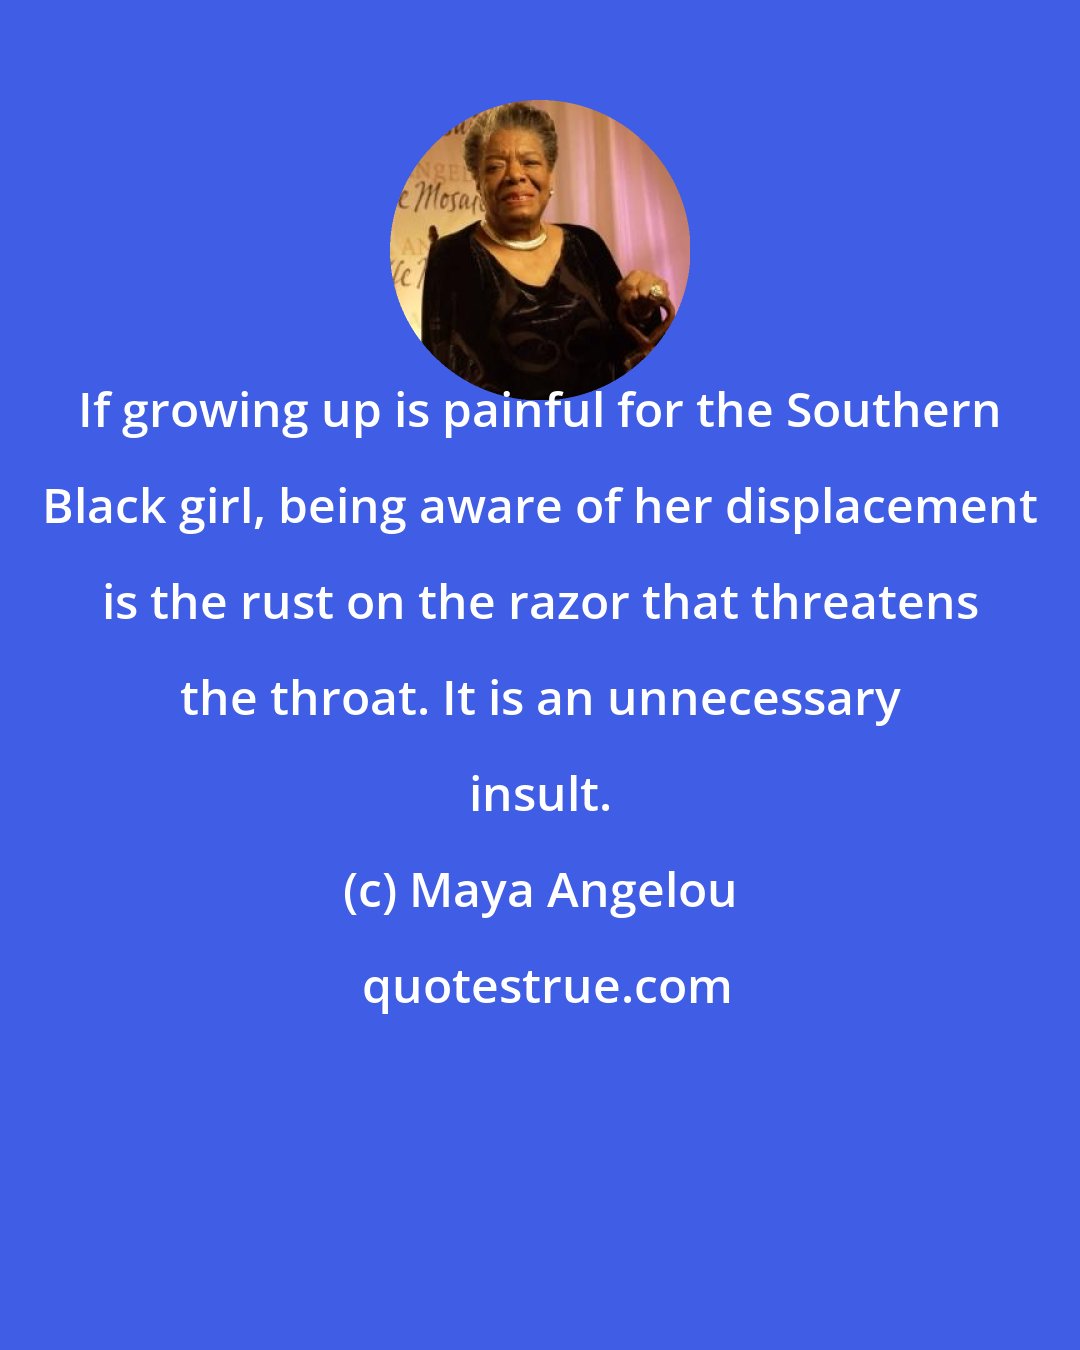 Maya Angelou: If growing up is painful for the Southern Black girl, being aware of her displacement is the rust on the razor that threatens the throat. It is an unnecessary insult.